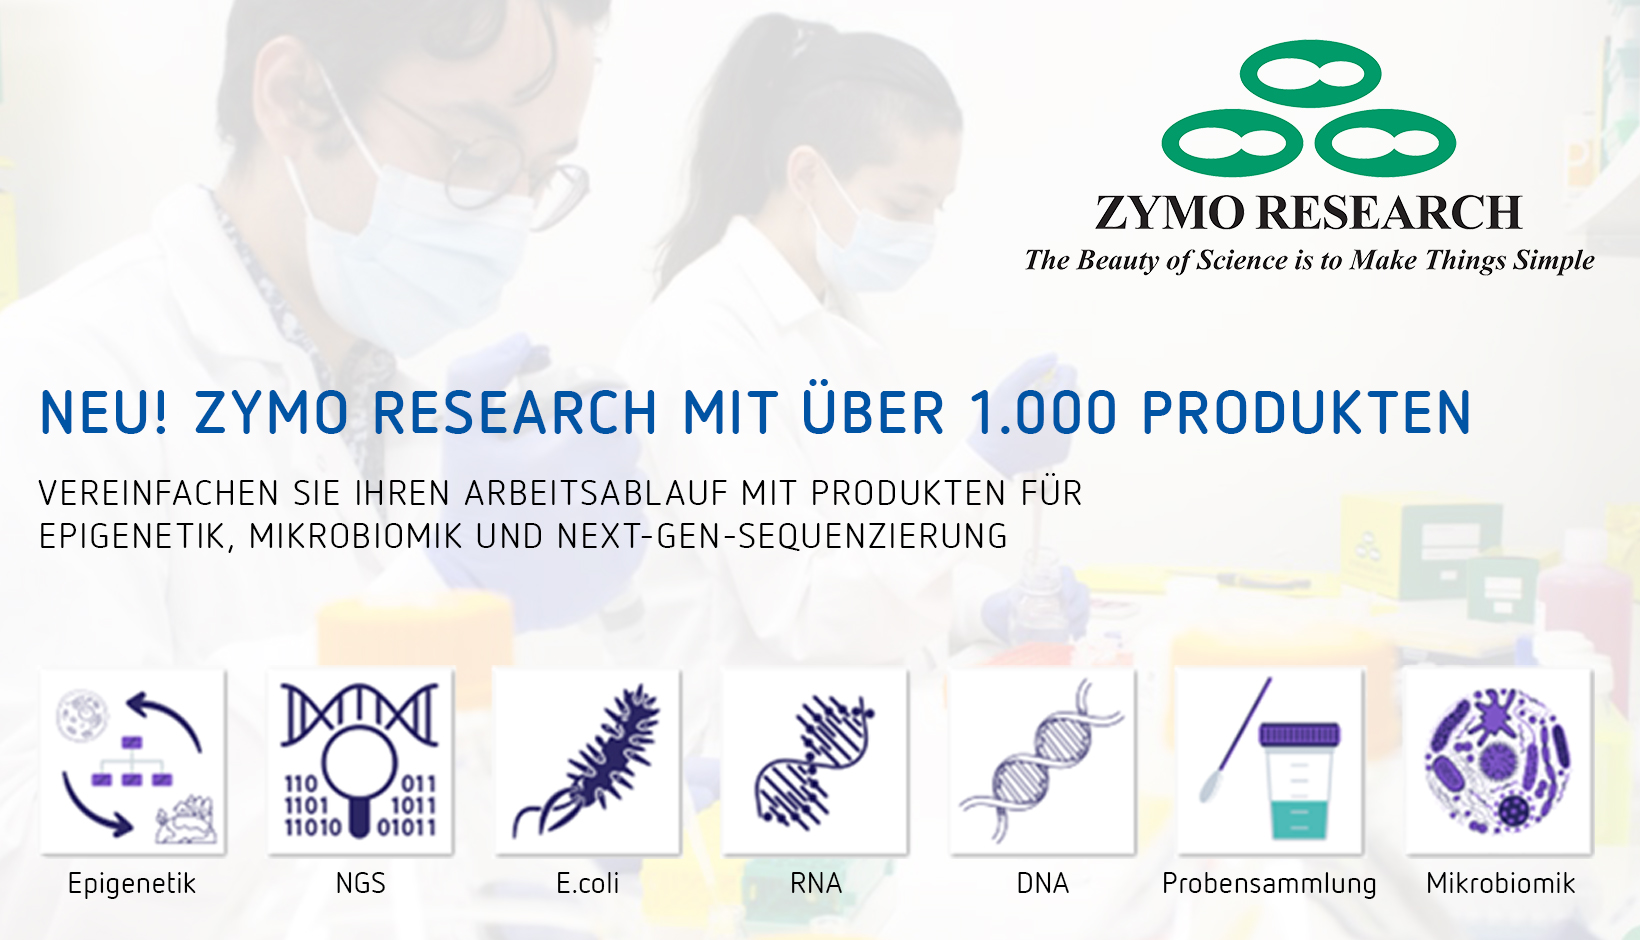 Zymo Research - Epigenetik- und Mikrobiomanalyse, Next-Generation-Sequencing (NGS)